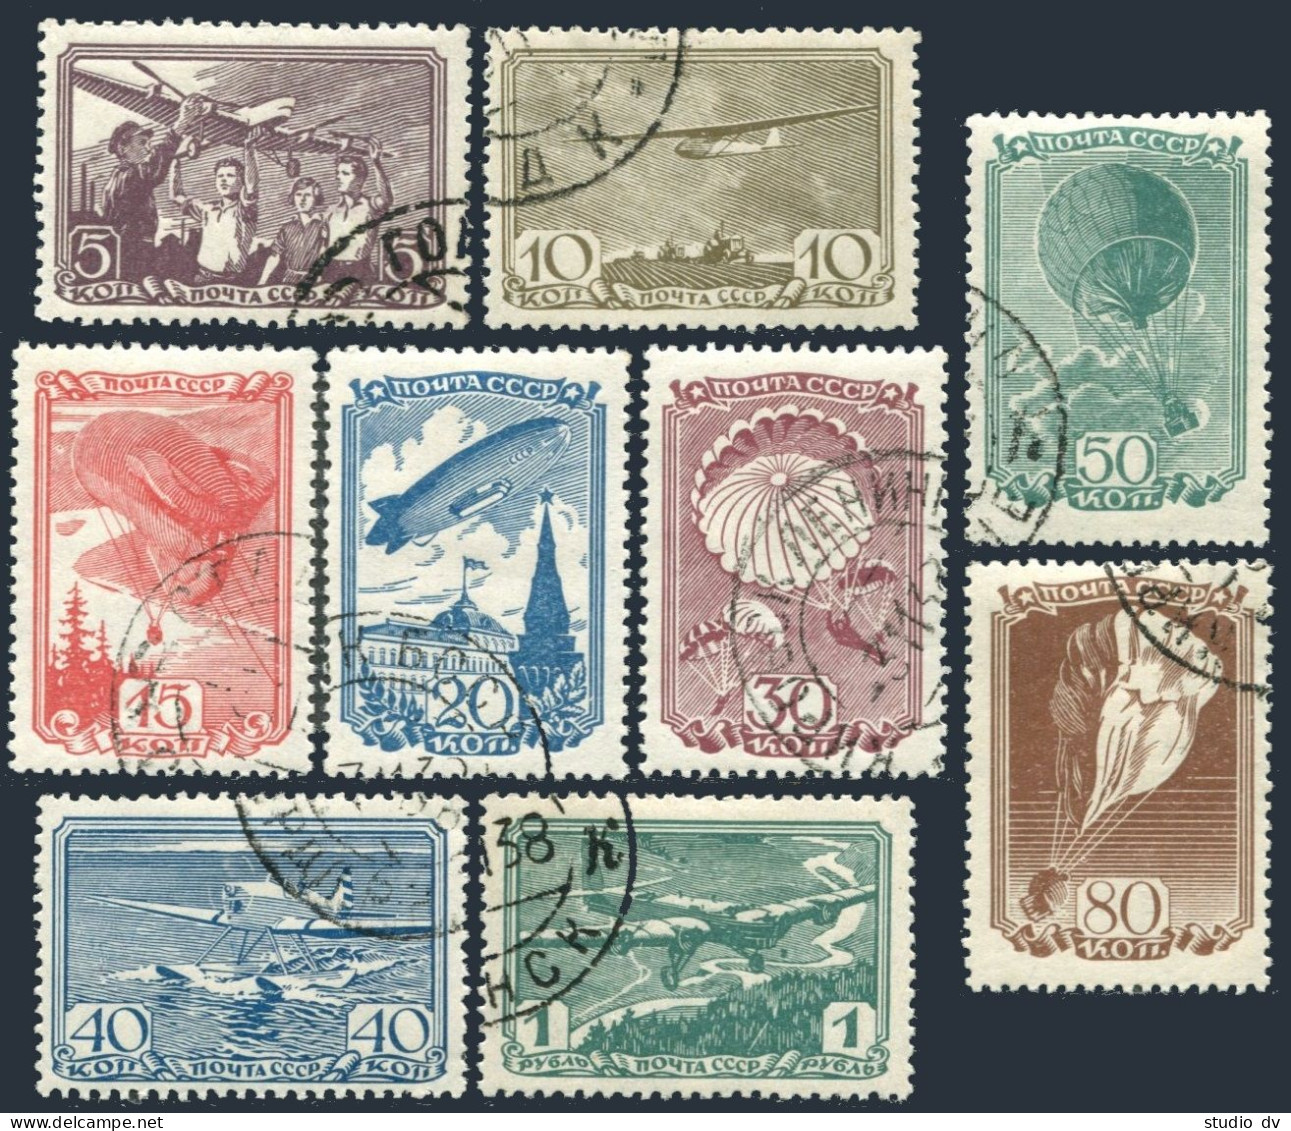 Russia 678-686,CTO.Michel 637-645. Aircraft 1938.Gilder,Plane,Parachute,Balloon, - Used Stamps